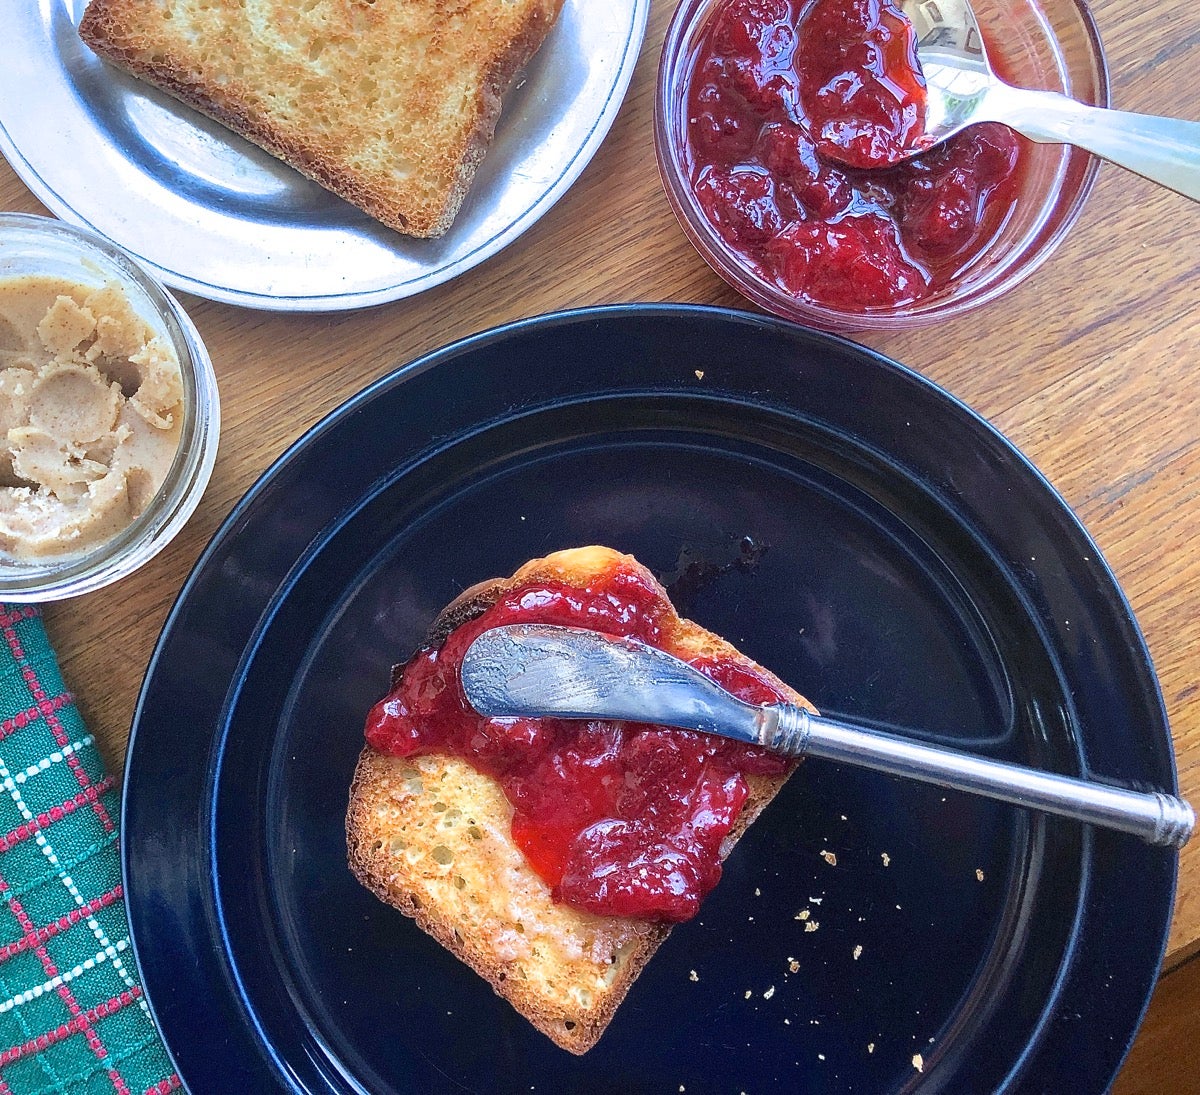 Toast on a plate, spread with butter and strawberry jam.